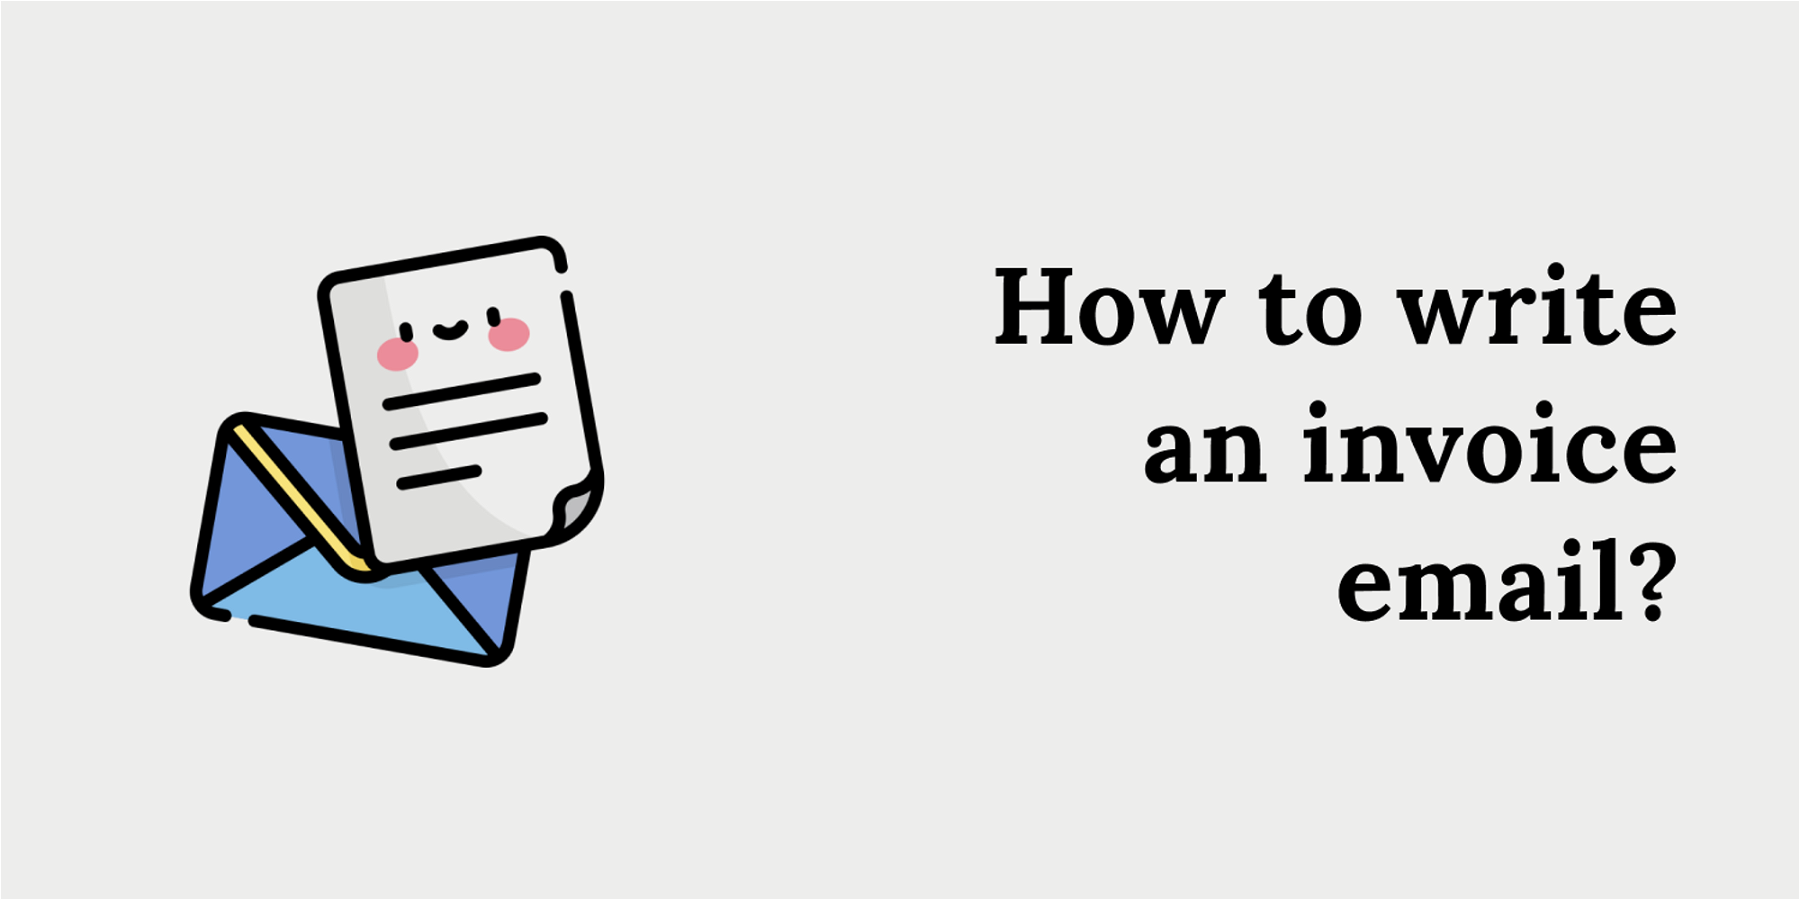 How to write an invoice email